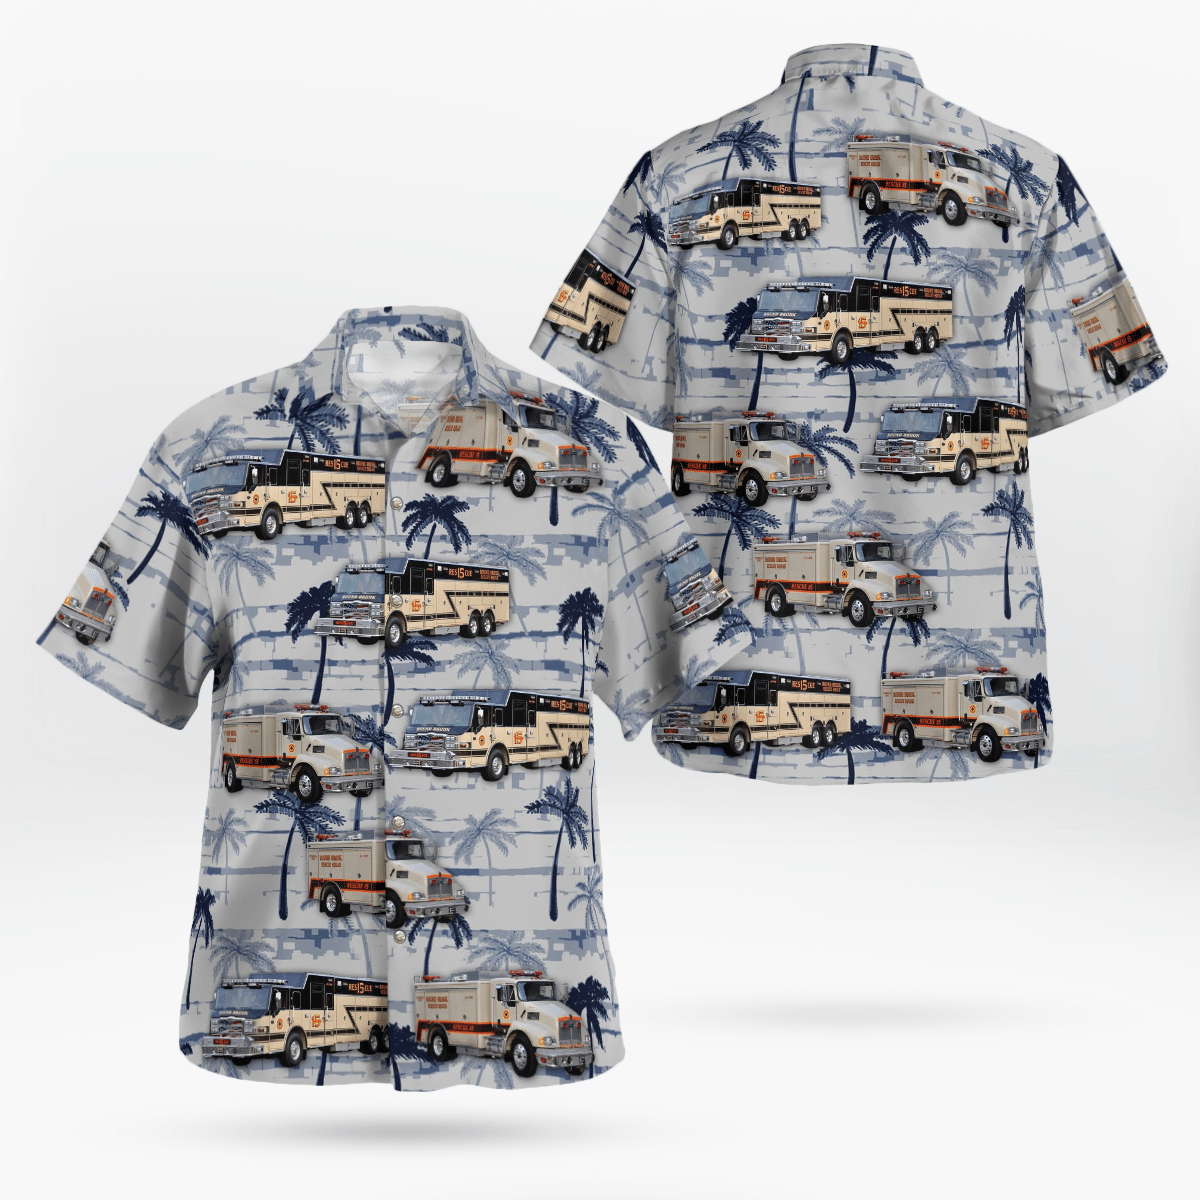 Consider getting these Hawaiian Shirt for your friends 195